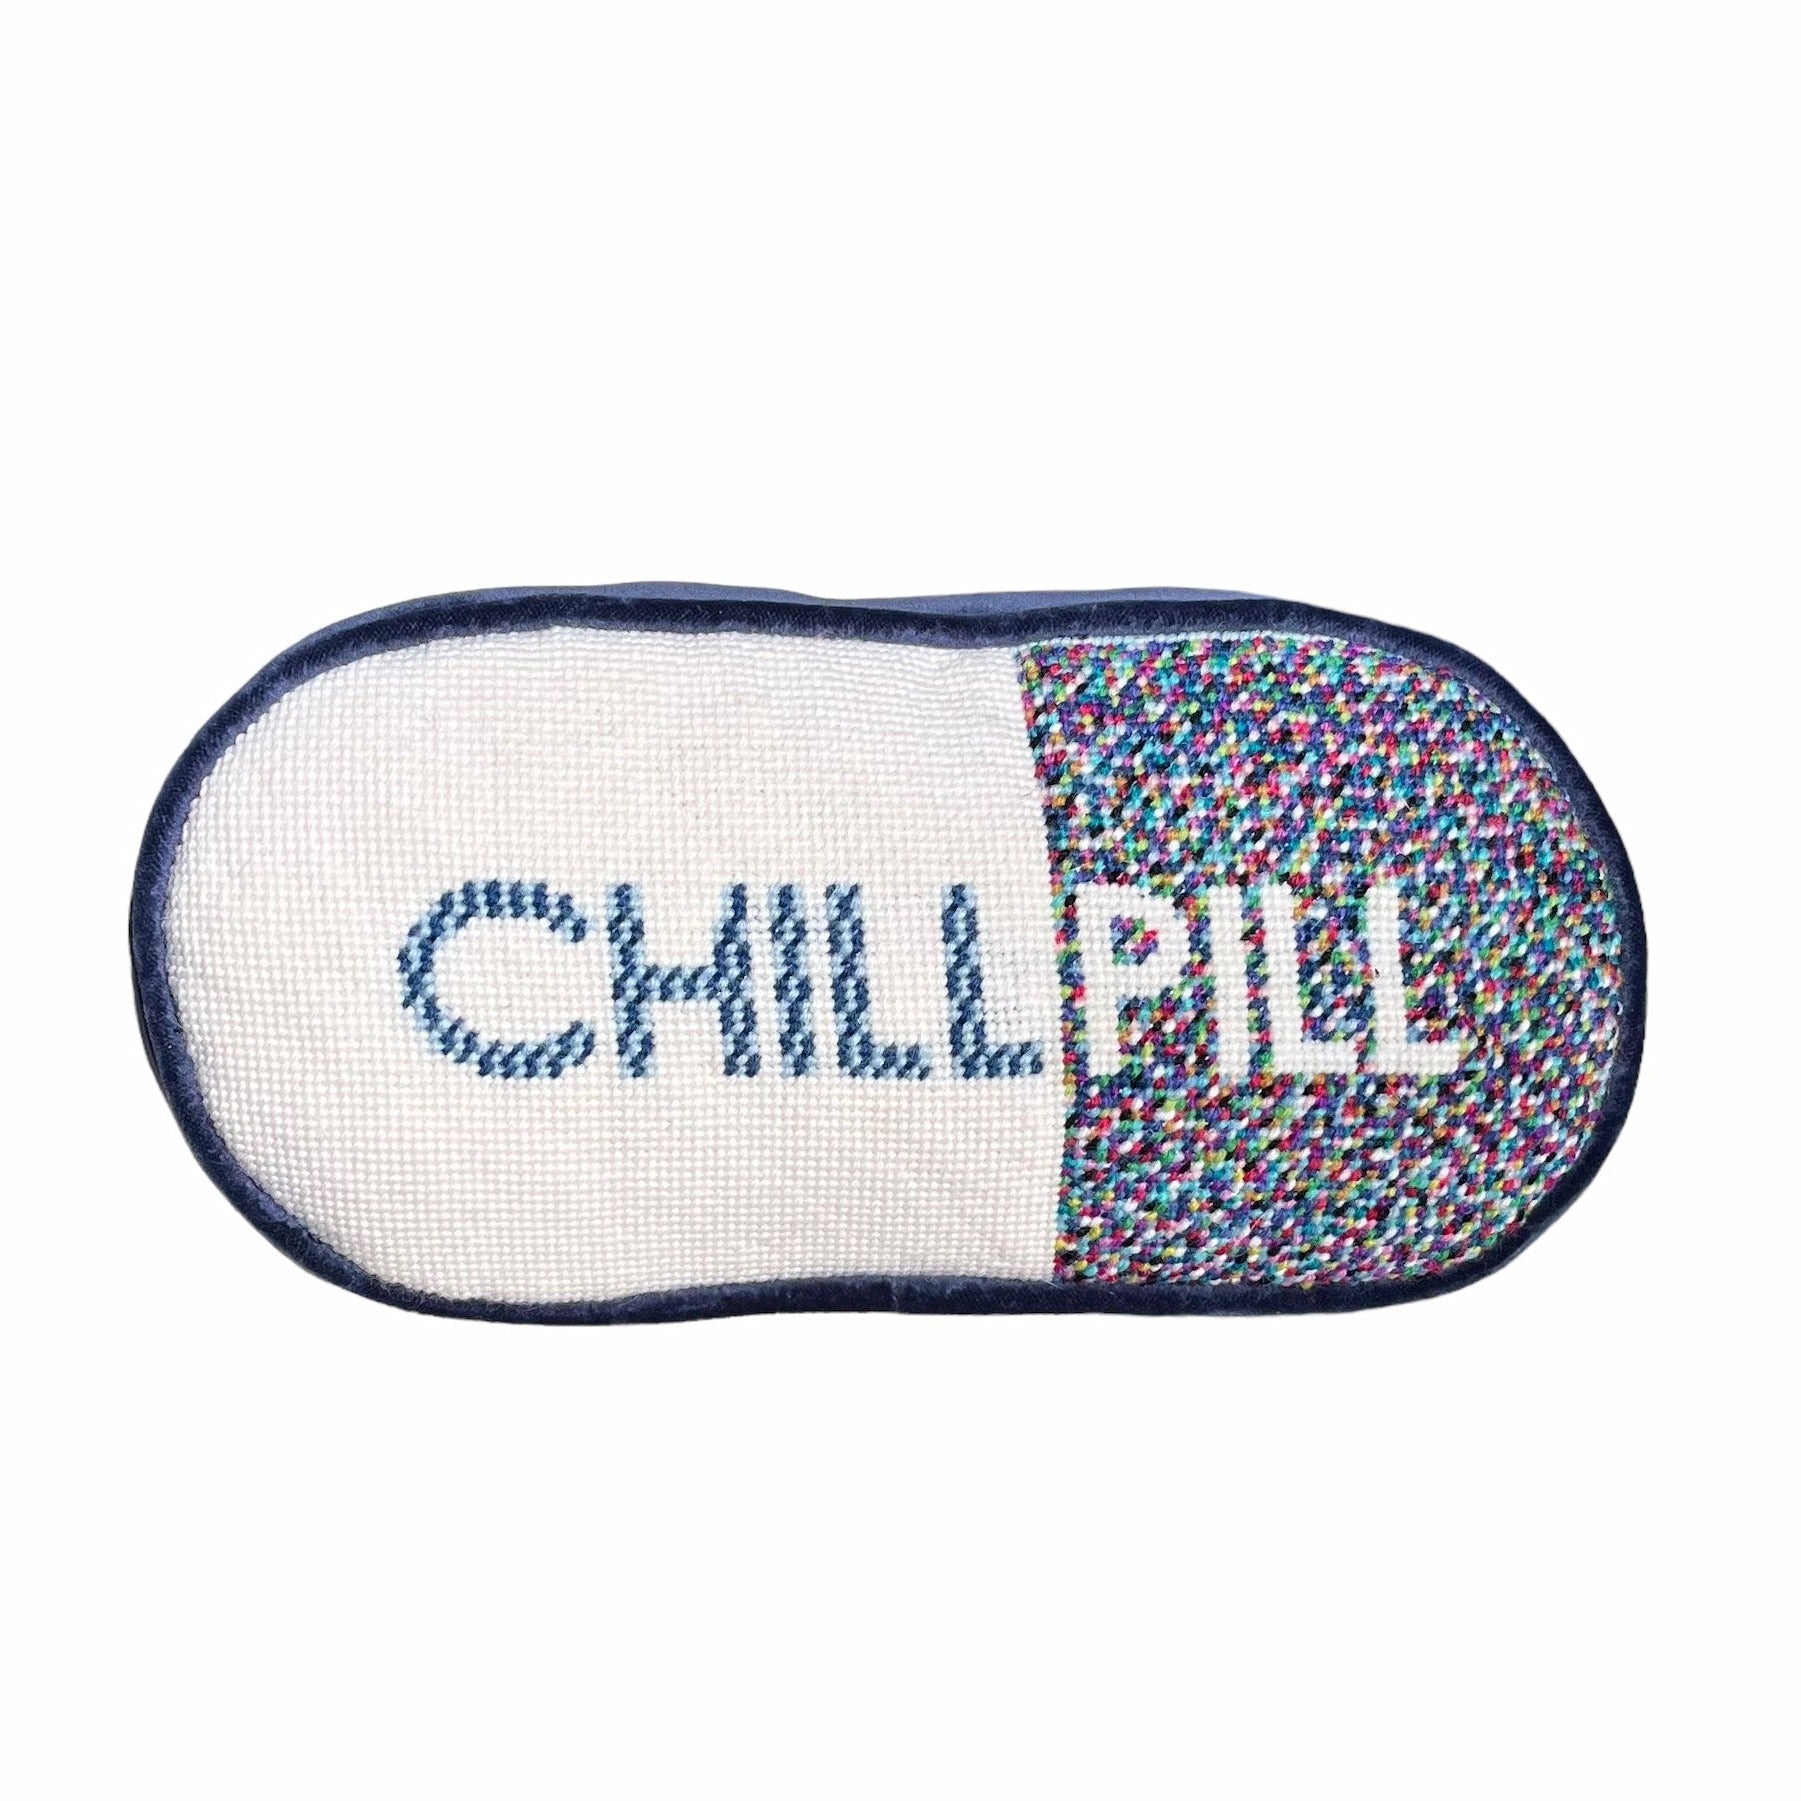 pill shaped pillow design is half white with blue CHILL & muti-colored dotted pattern PILL in white